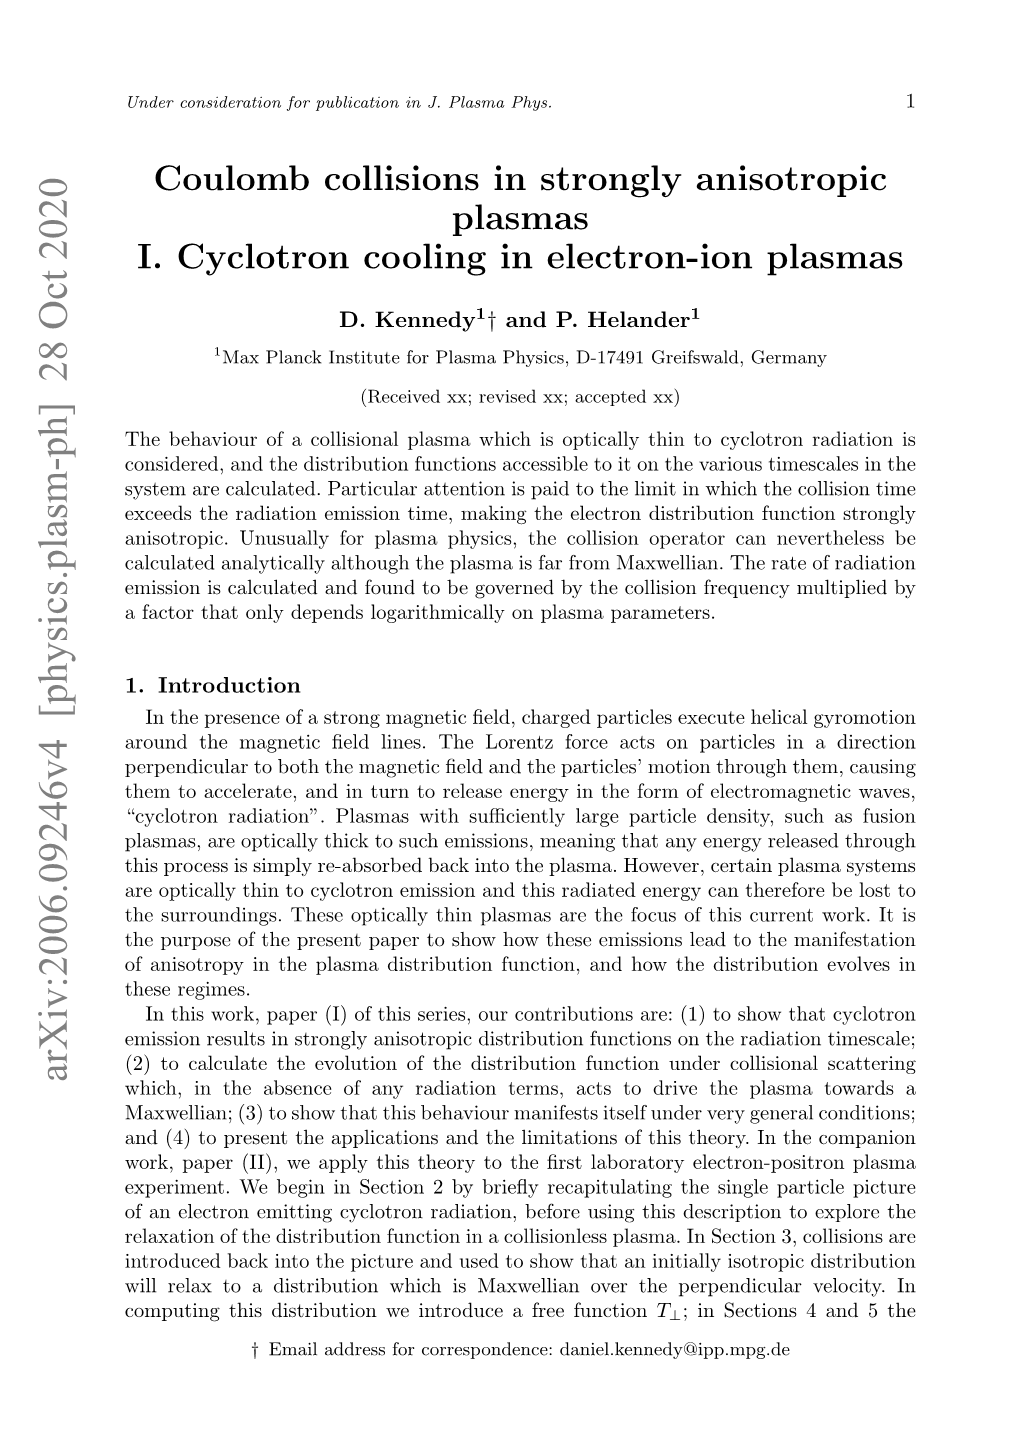 Coulomb Collisions in Strongly Anisotropic Plasmas I. Cyclotron Cooling in Electron-Ion Plasmas